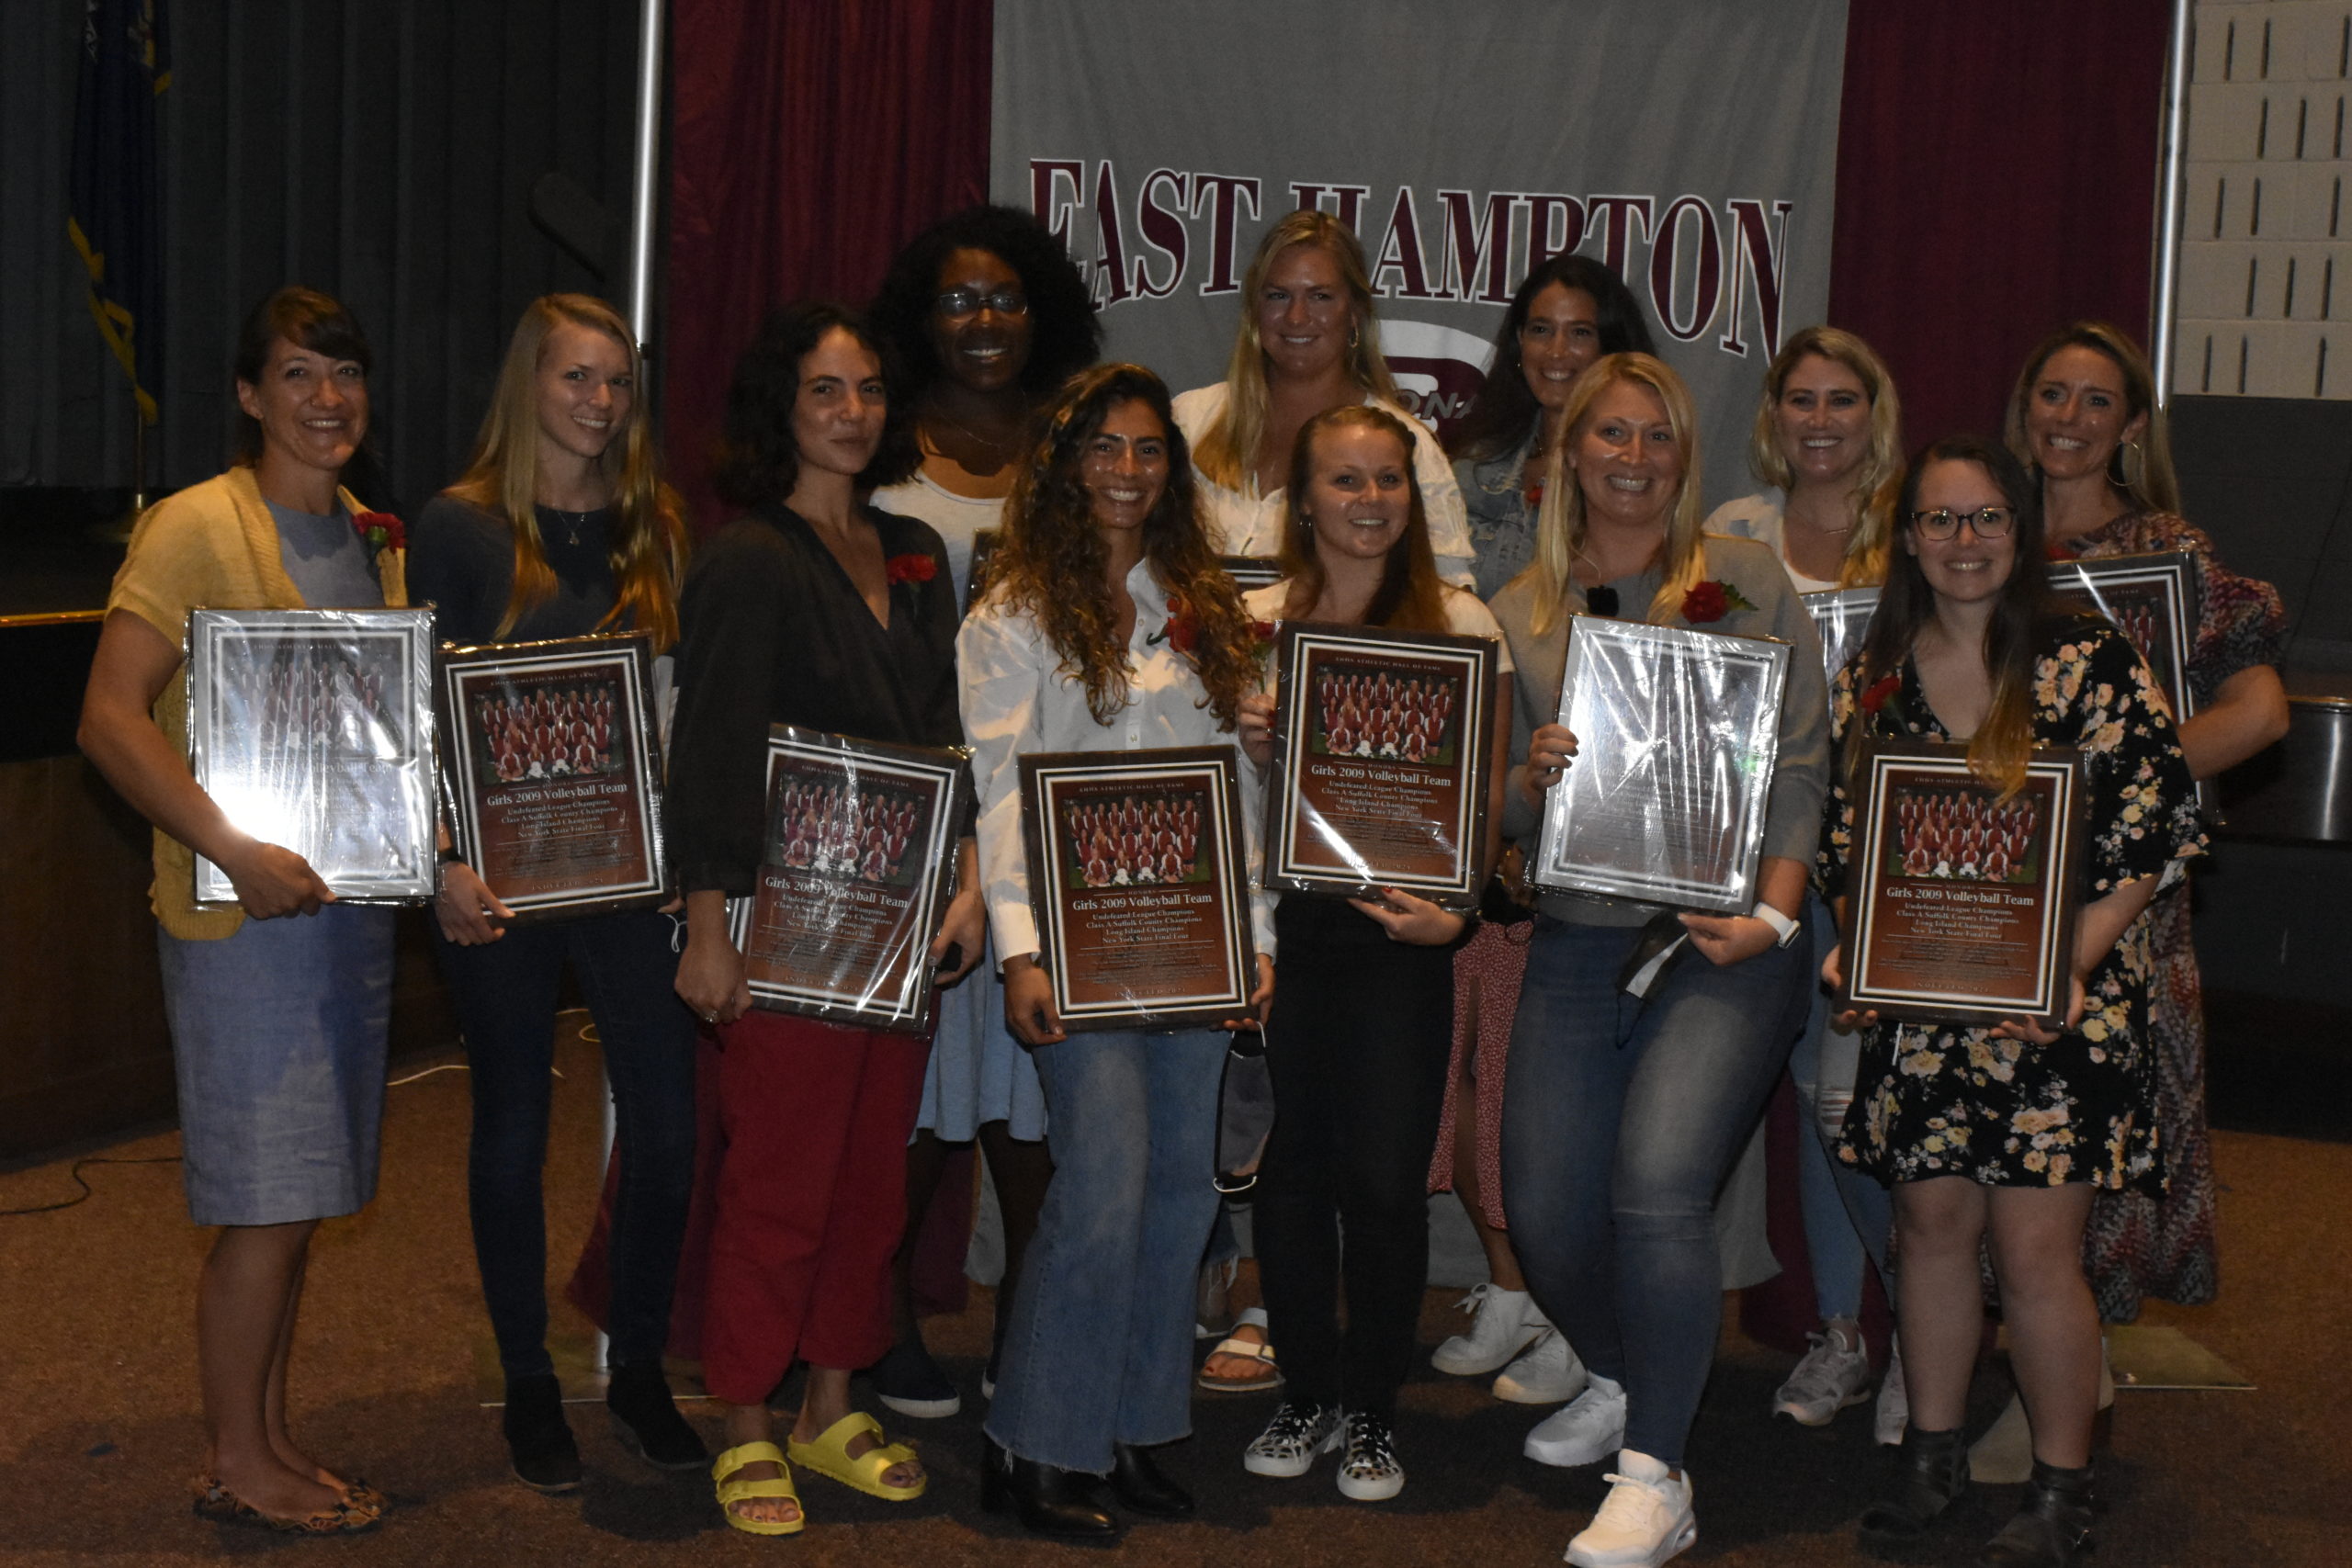 East Hampton's 2009 girls volleyball team, which reached the New York State Final Four, the furthest any team in program history has gone, was inducted into the hall of fame this past weekend.